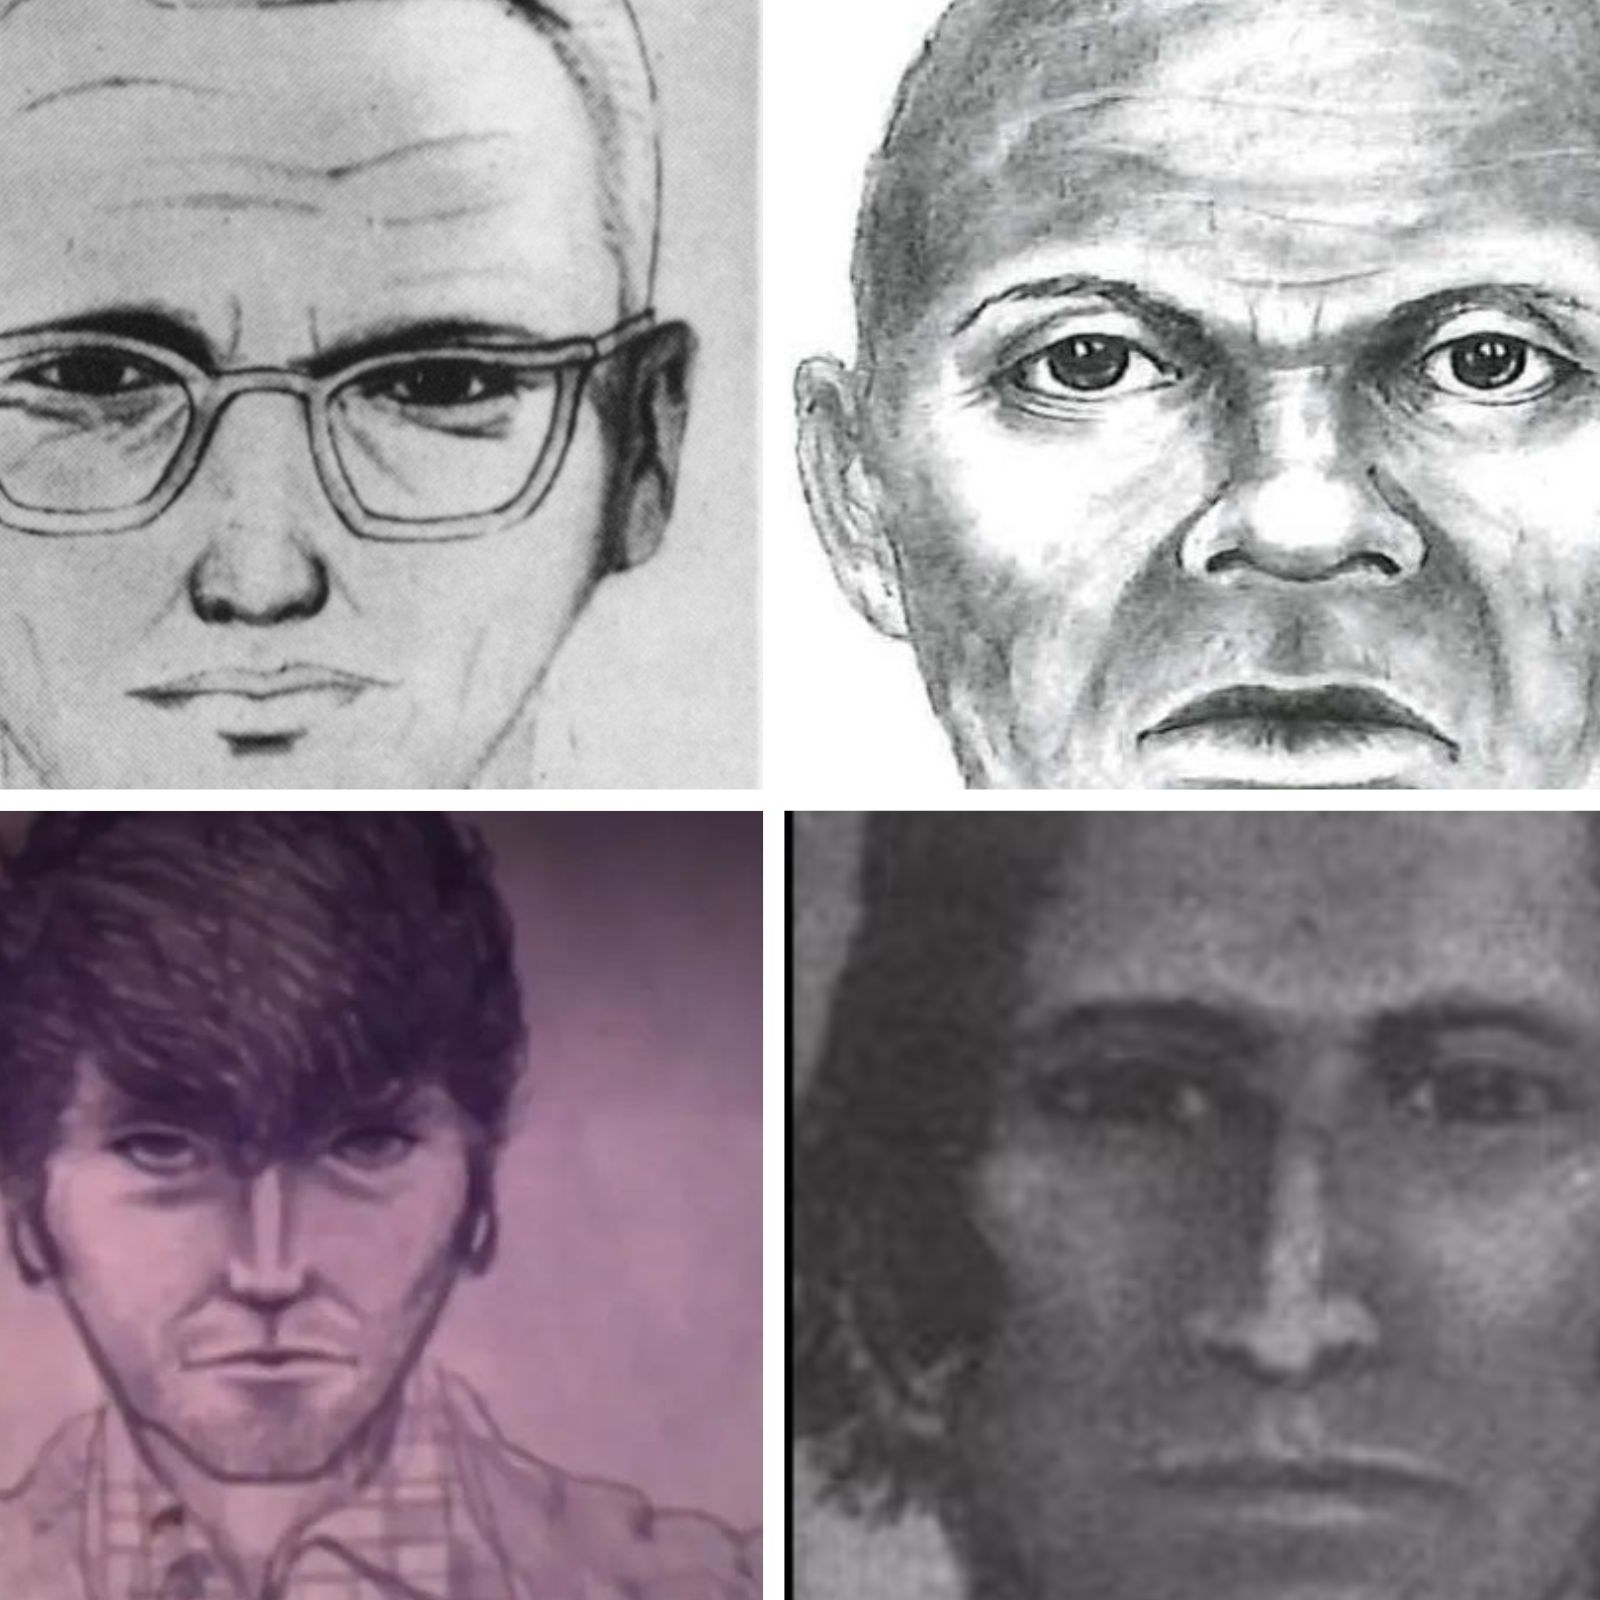 11 Brutal Murderers And Prolific Serial Killers You Don't Know